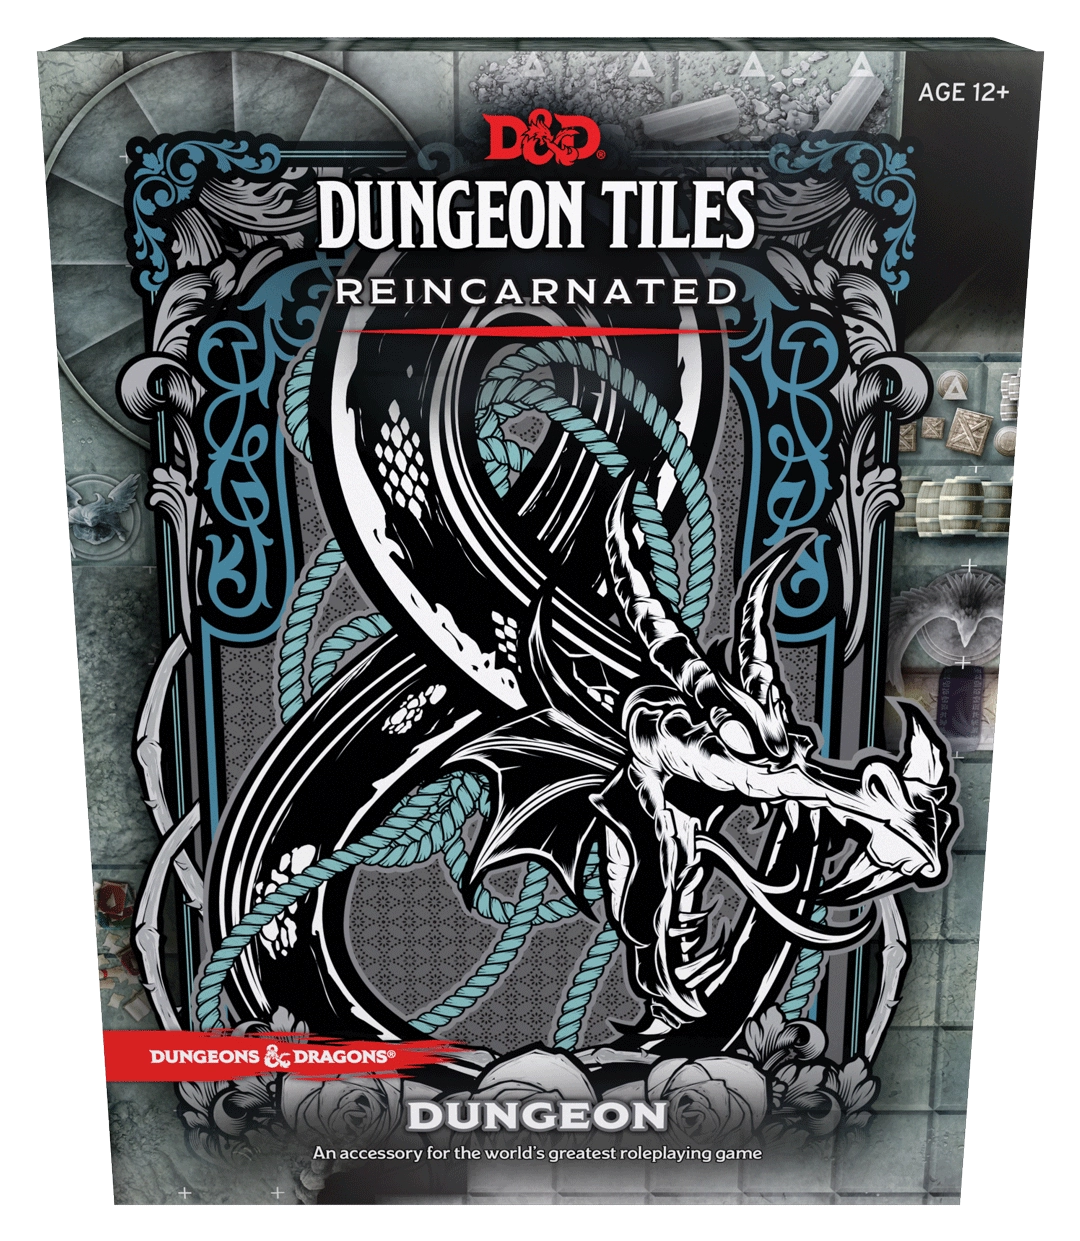 D&D Dungeon Tiles Reincarnated - Dungeon 5th Ed